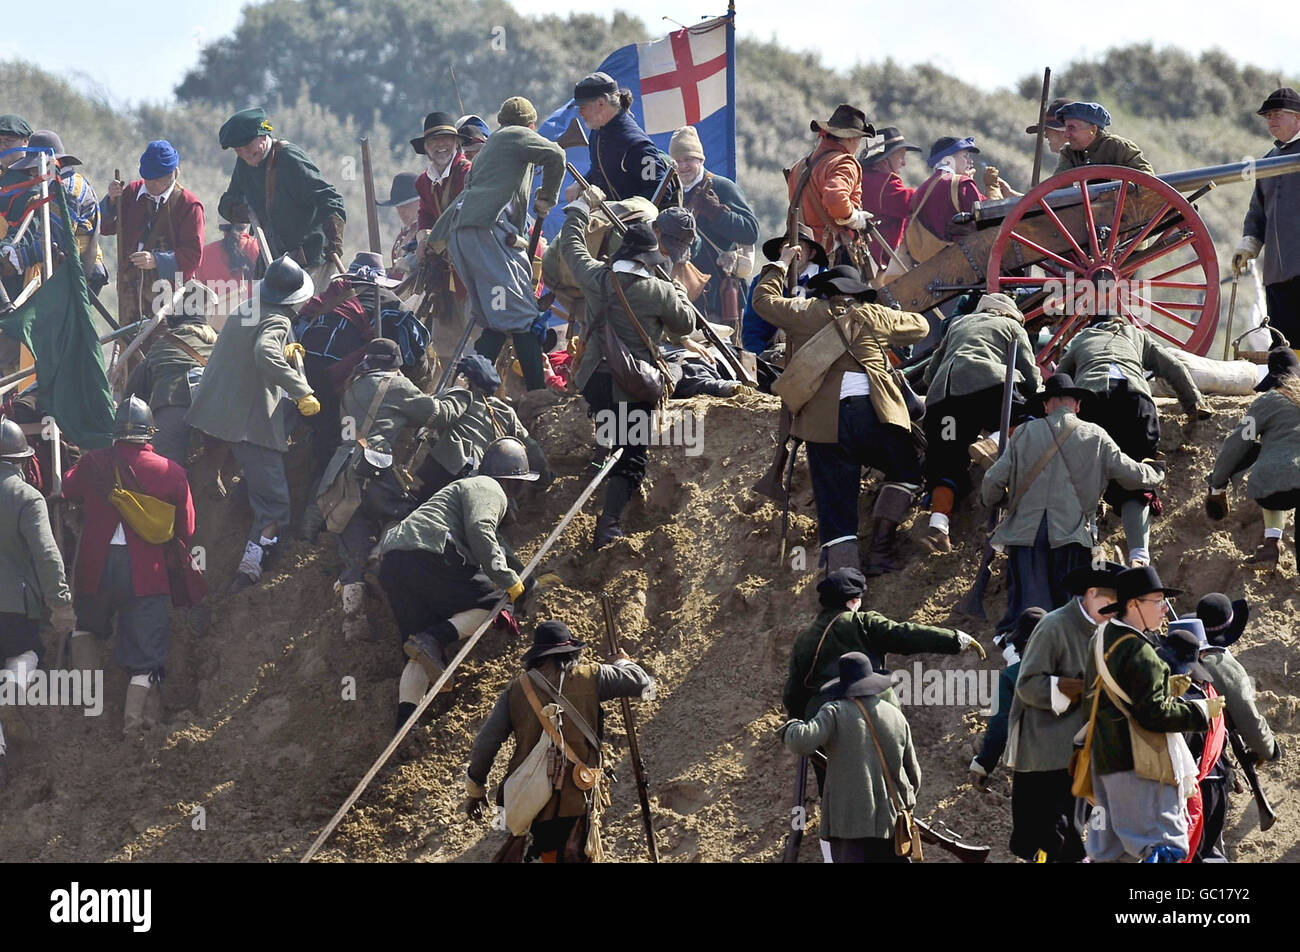 Customs and Traditions - English Civil War Re-enactment - Weston-Super-Mare Stock Photo